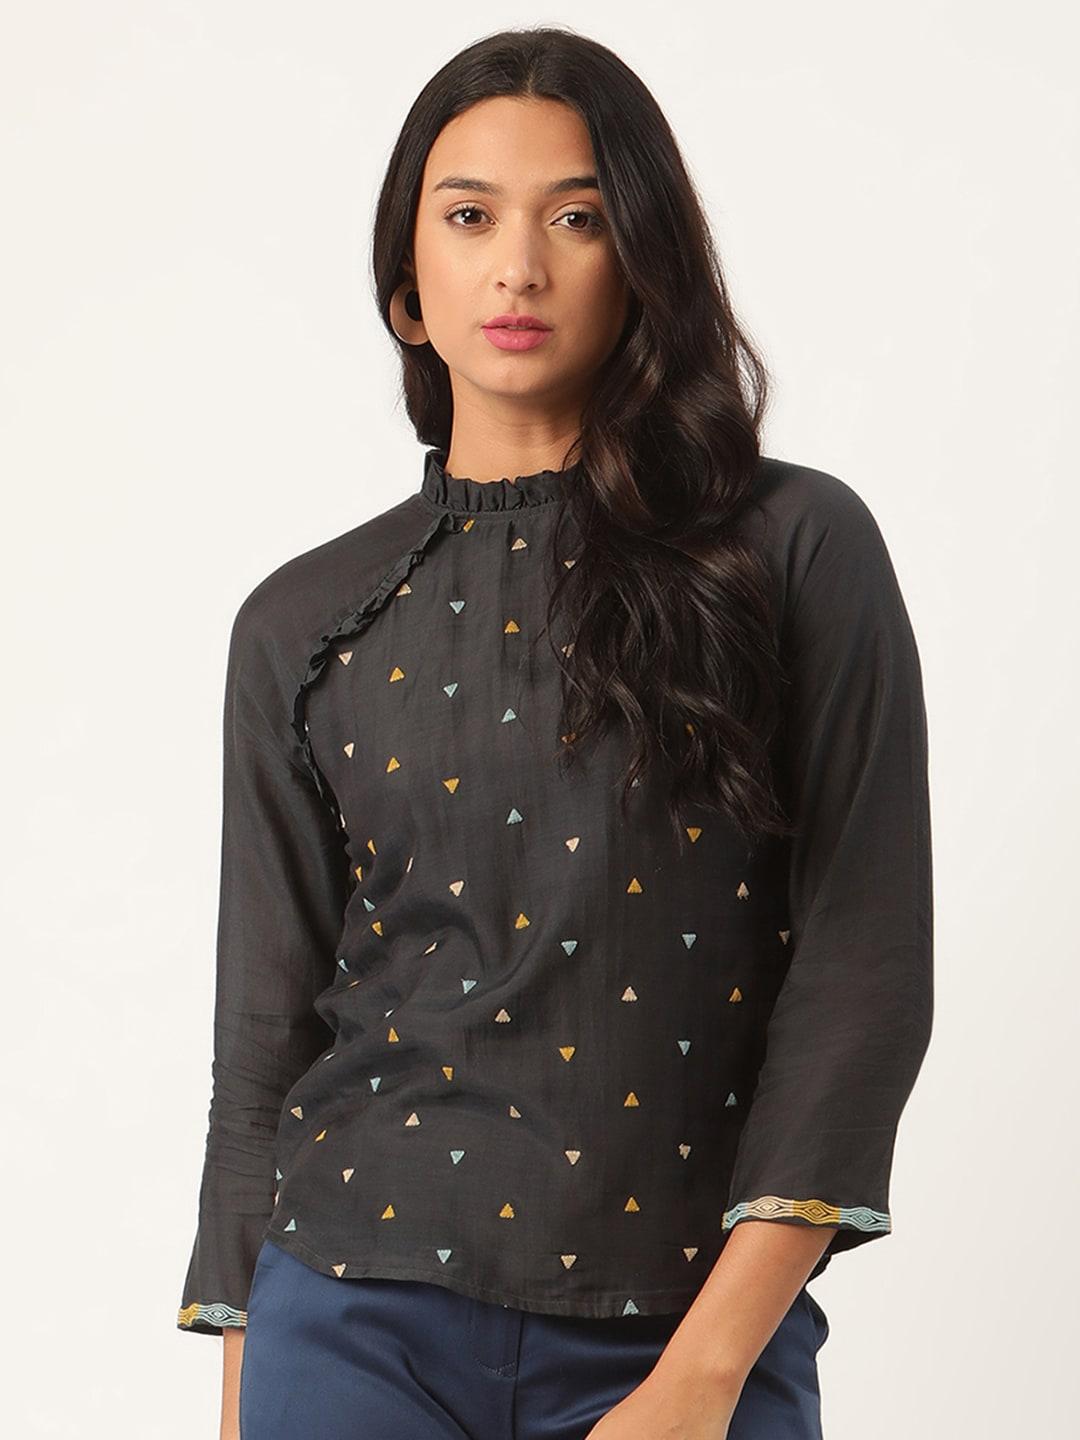 rooted-women-navy-blue-embroidered-top